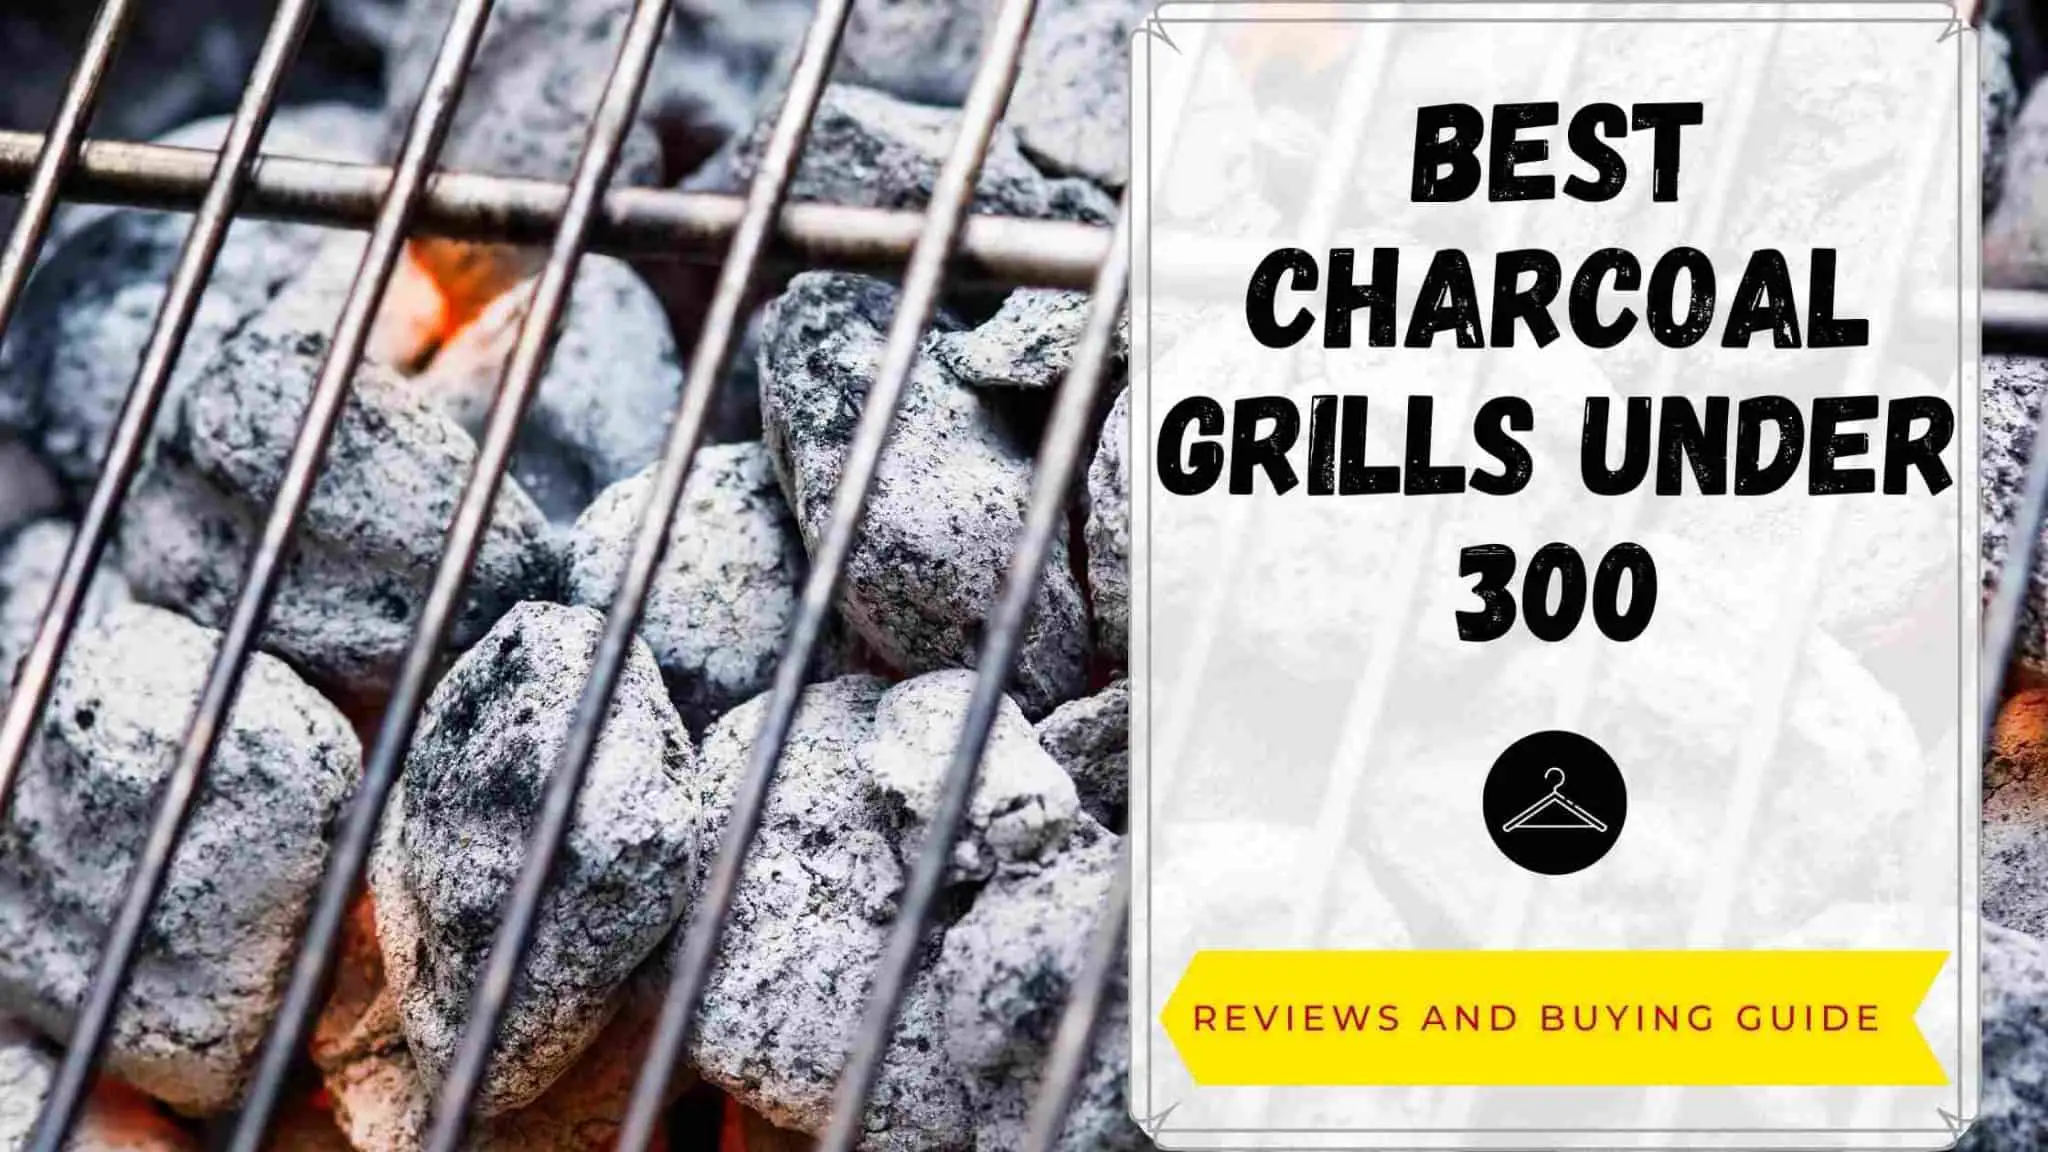 Top 15 Best Charcoal Grills Under 300: Reviews